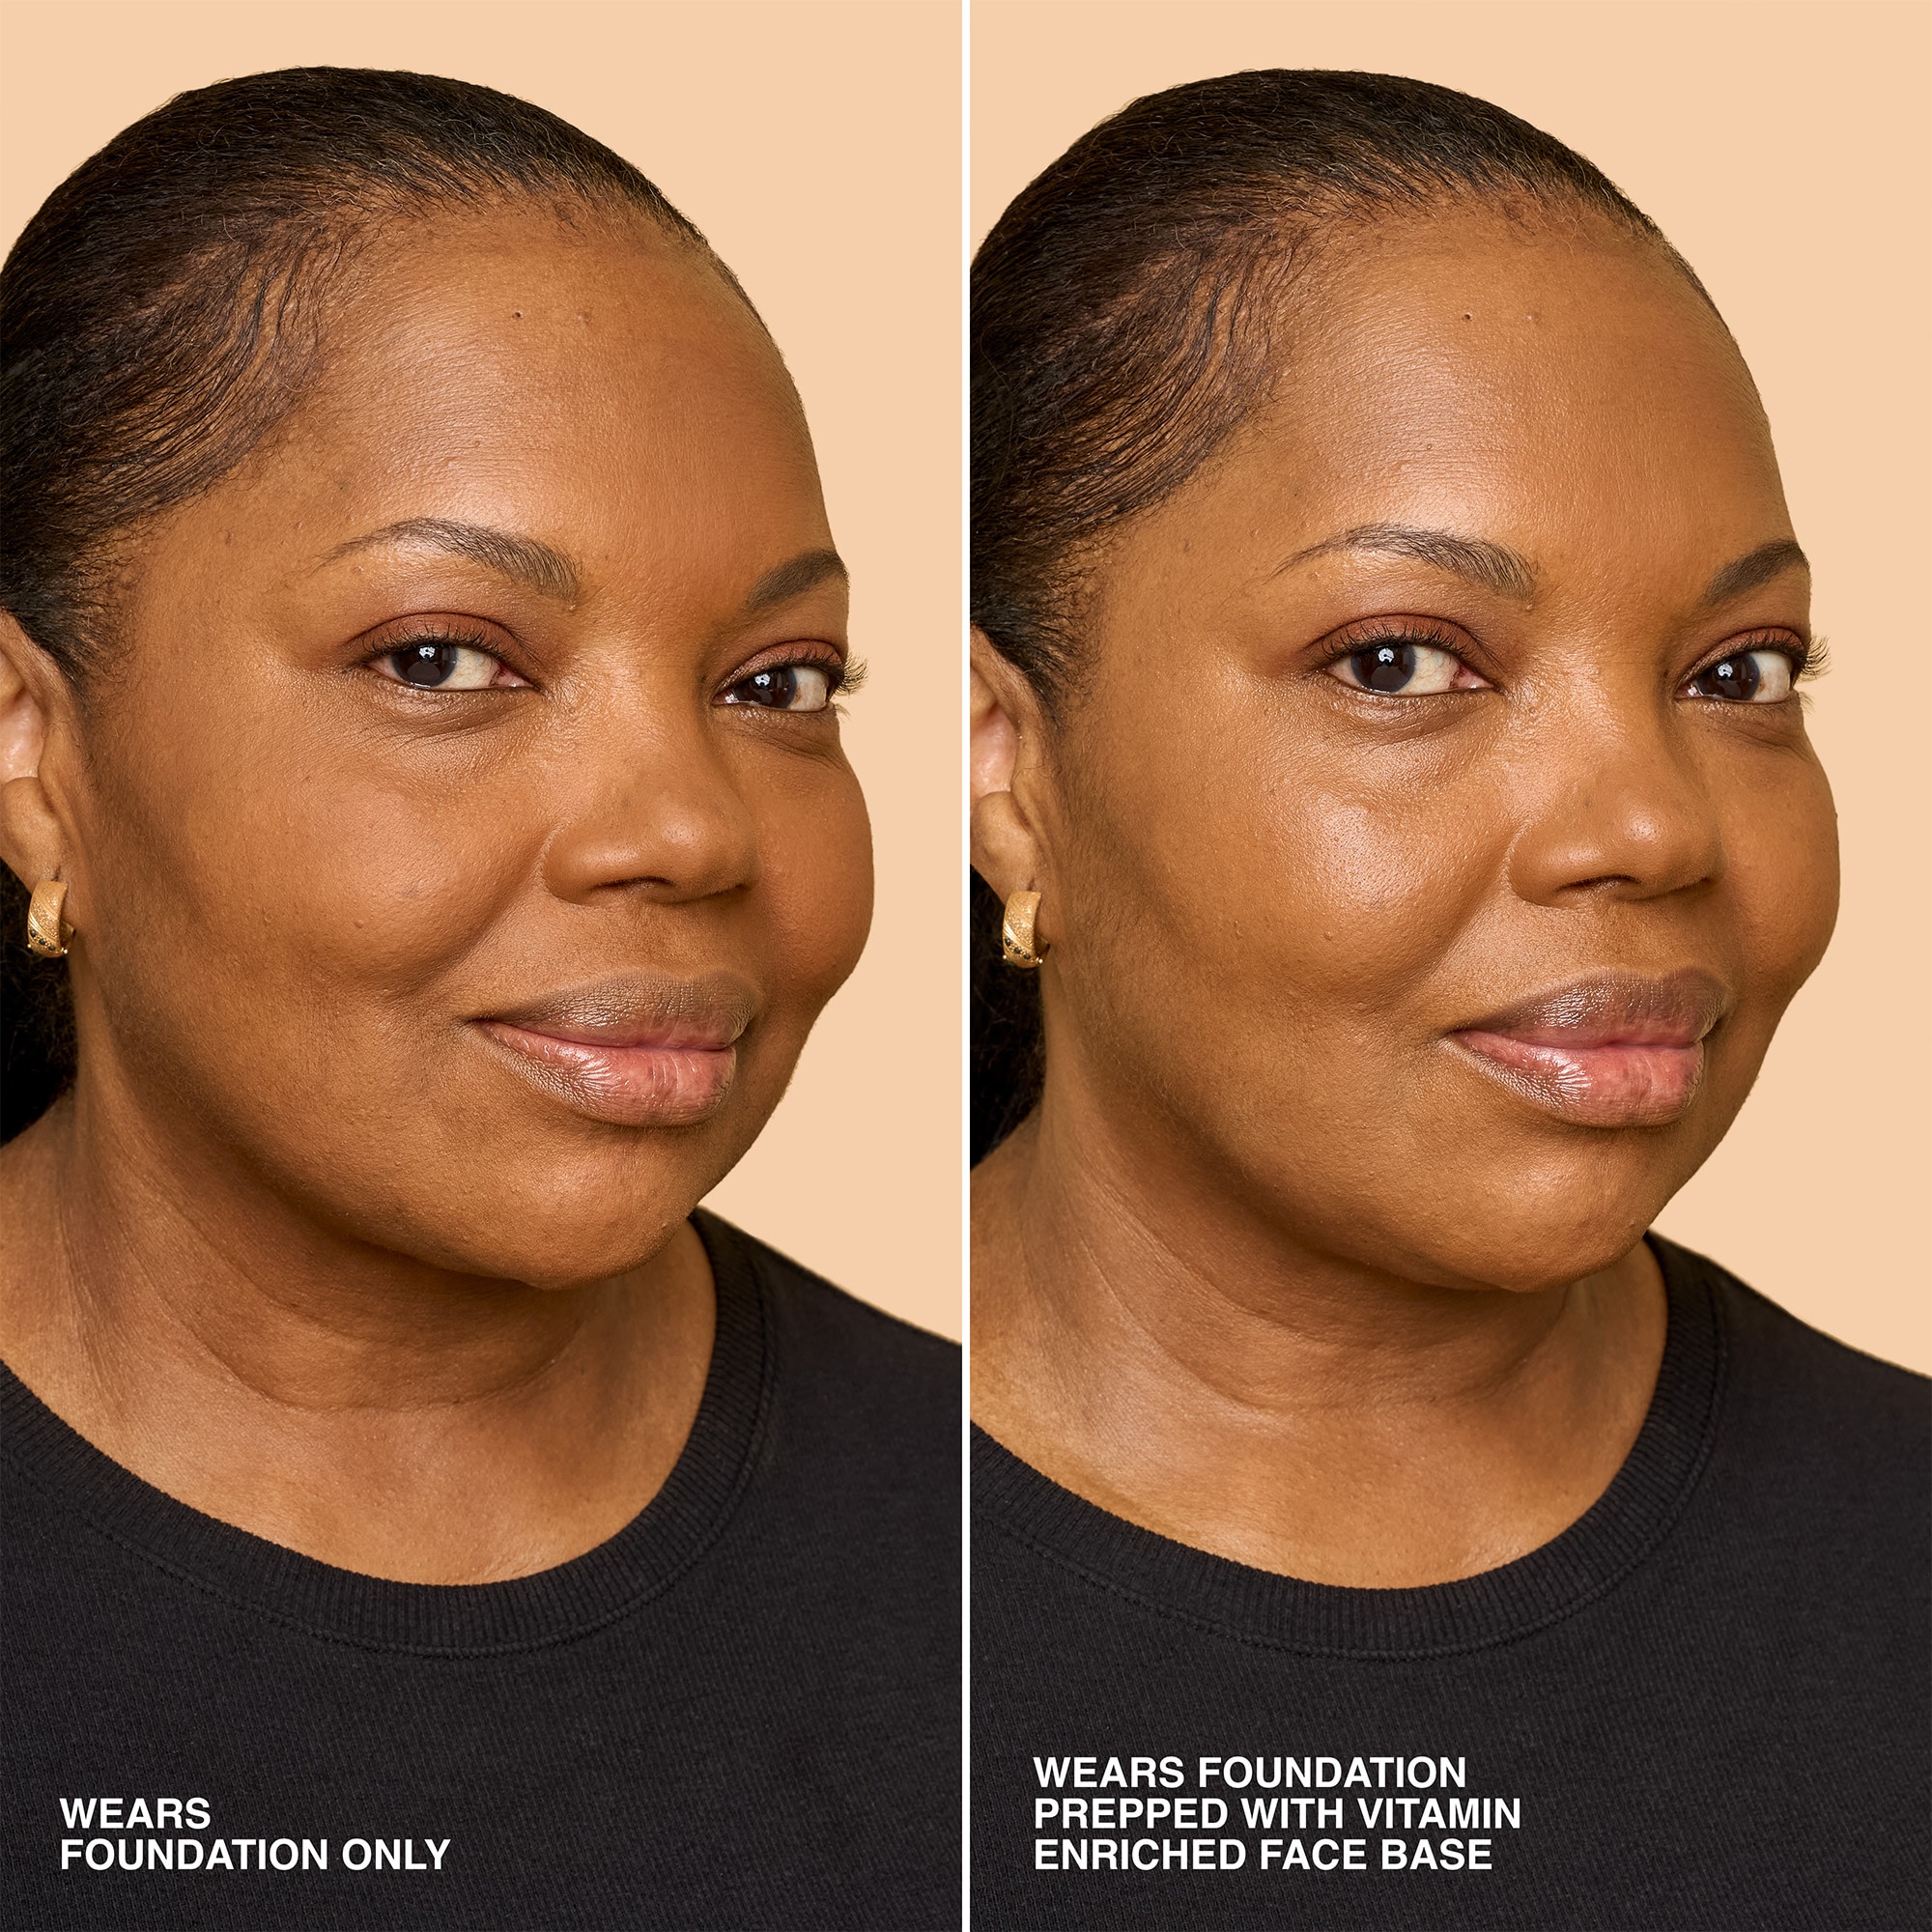 before and after of model with foundation only vs foundation and bobbi brown vitamin enriched face base